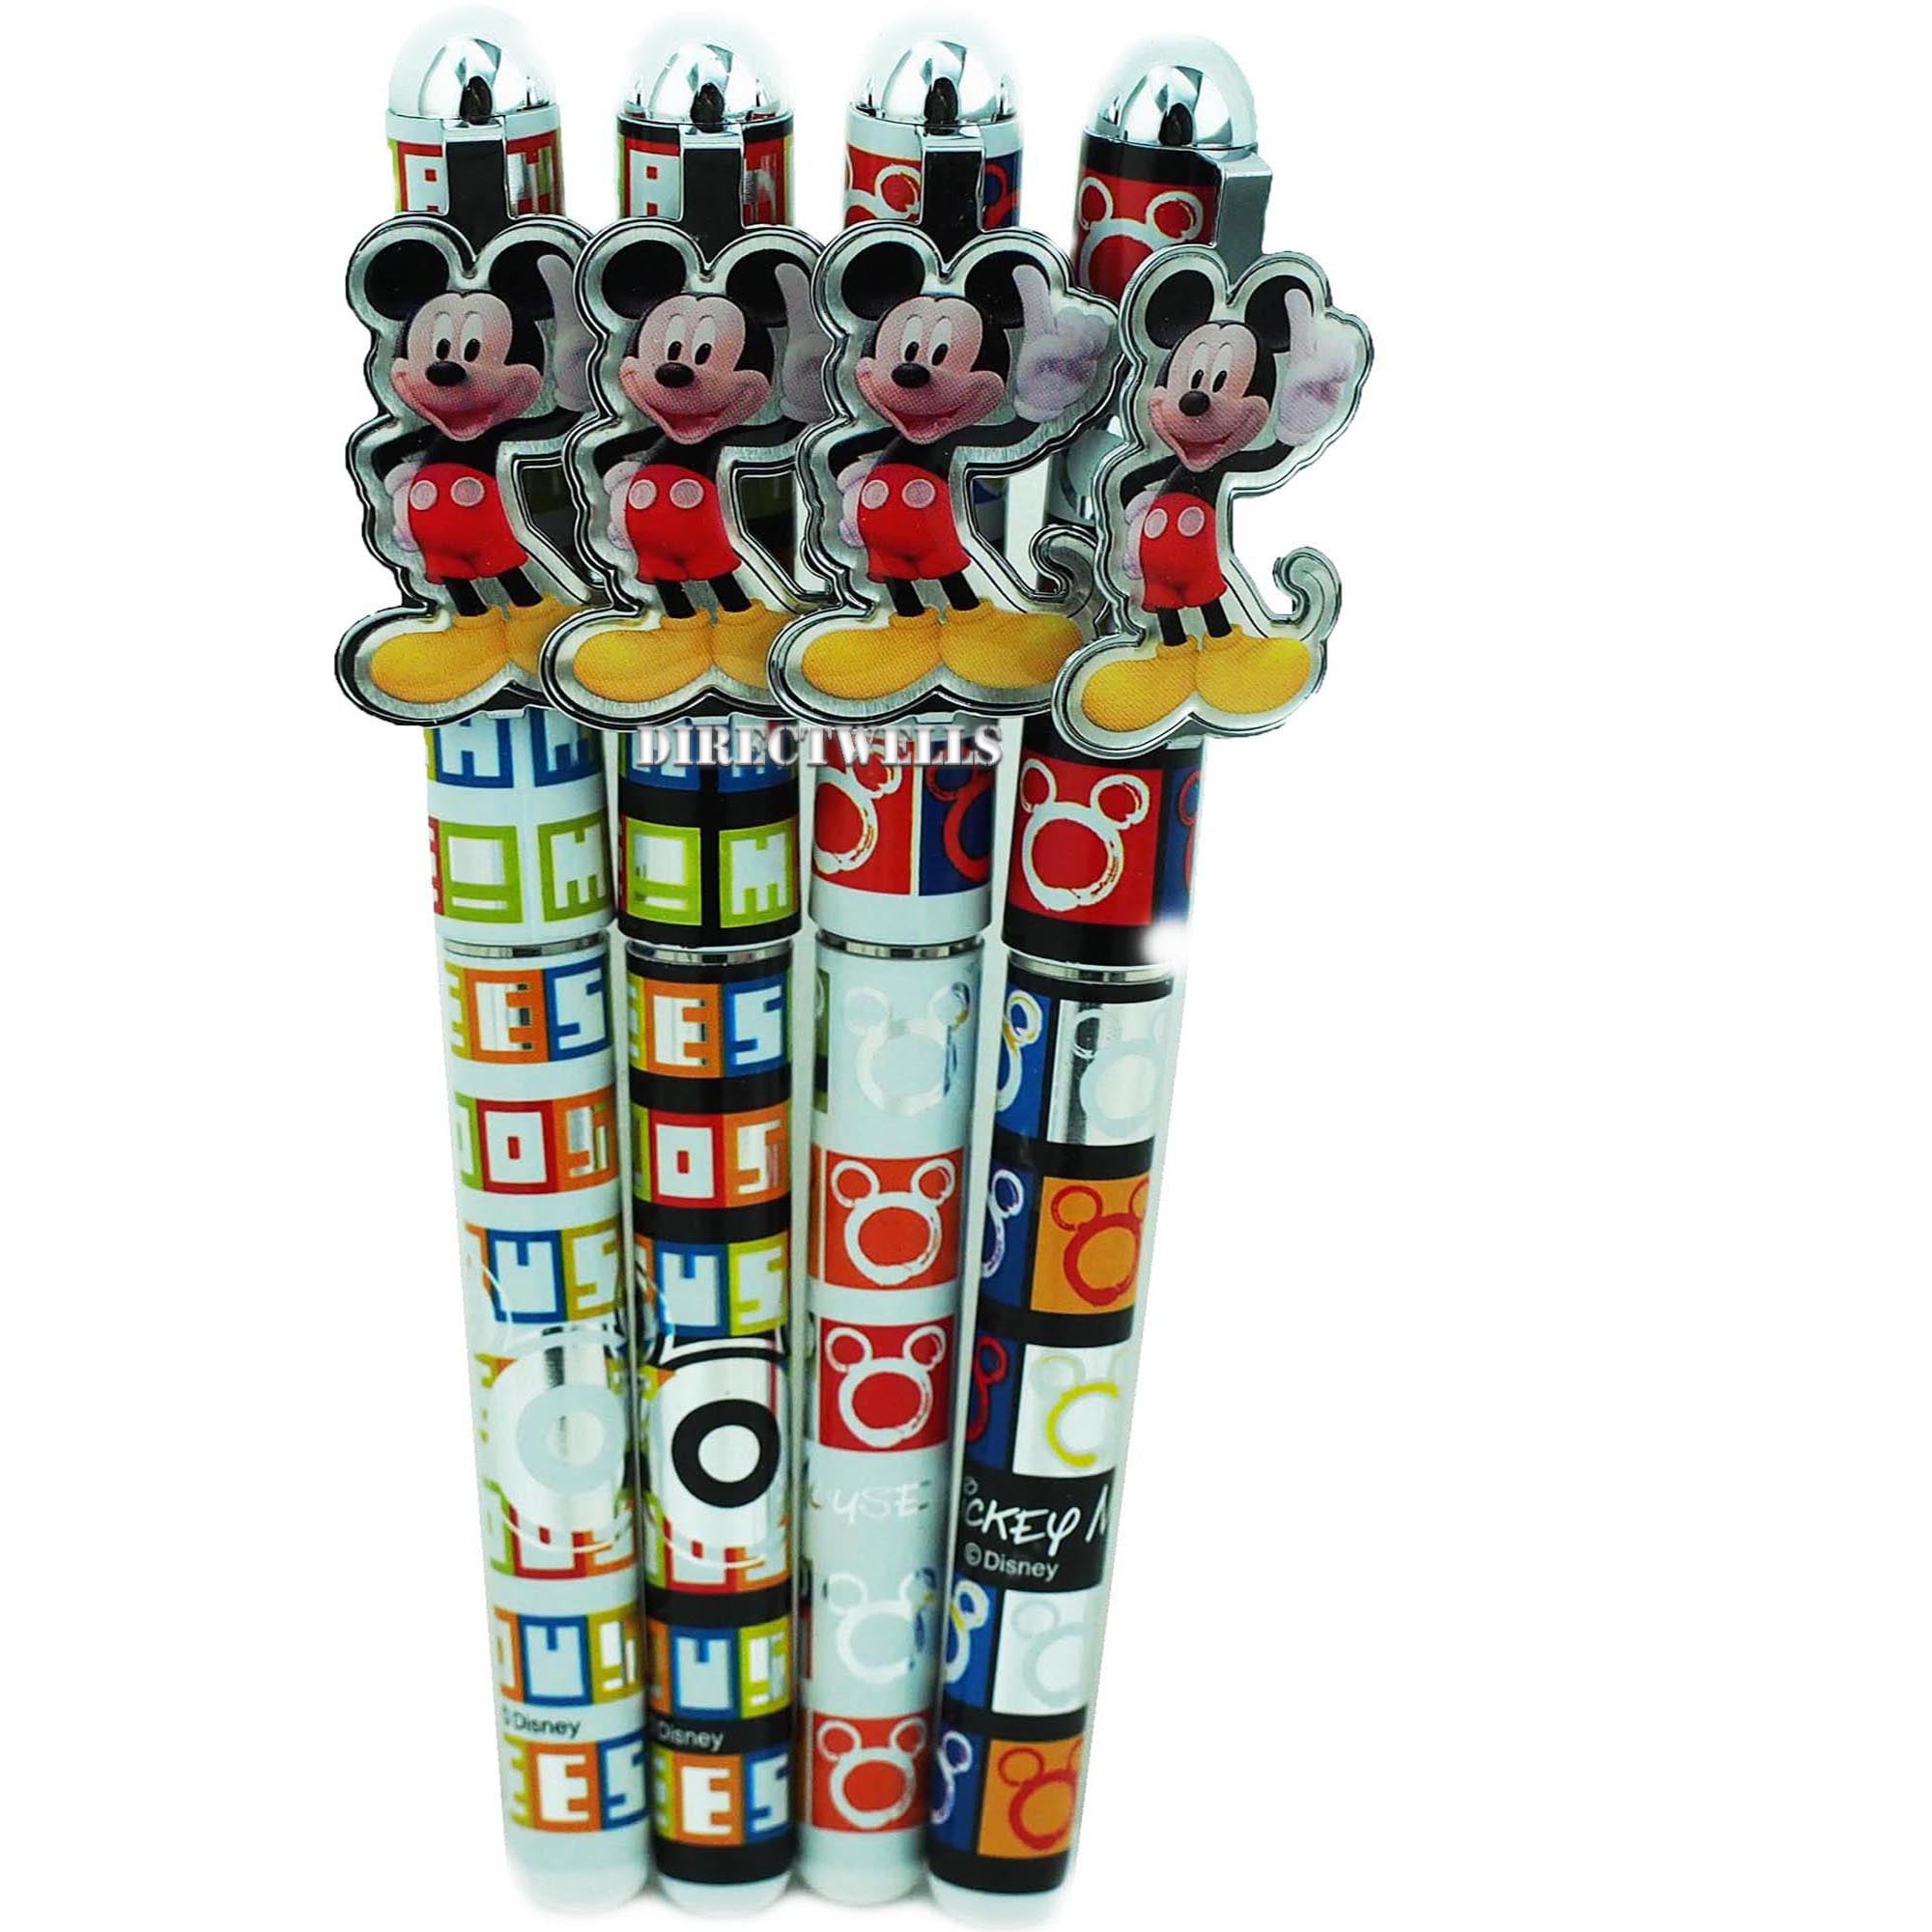 Disney Mickey Mouse & Minnie Mouse Pen set Of 2 3D Pens In Box Primark New 2020 